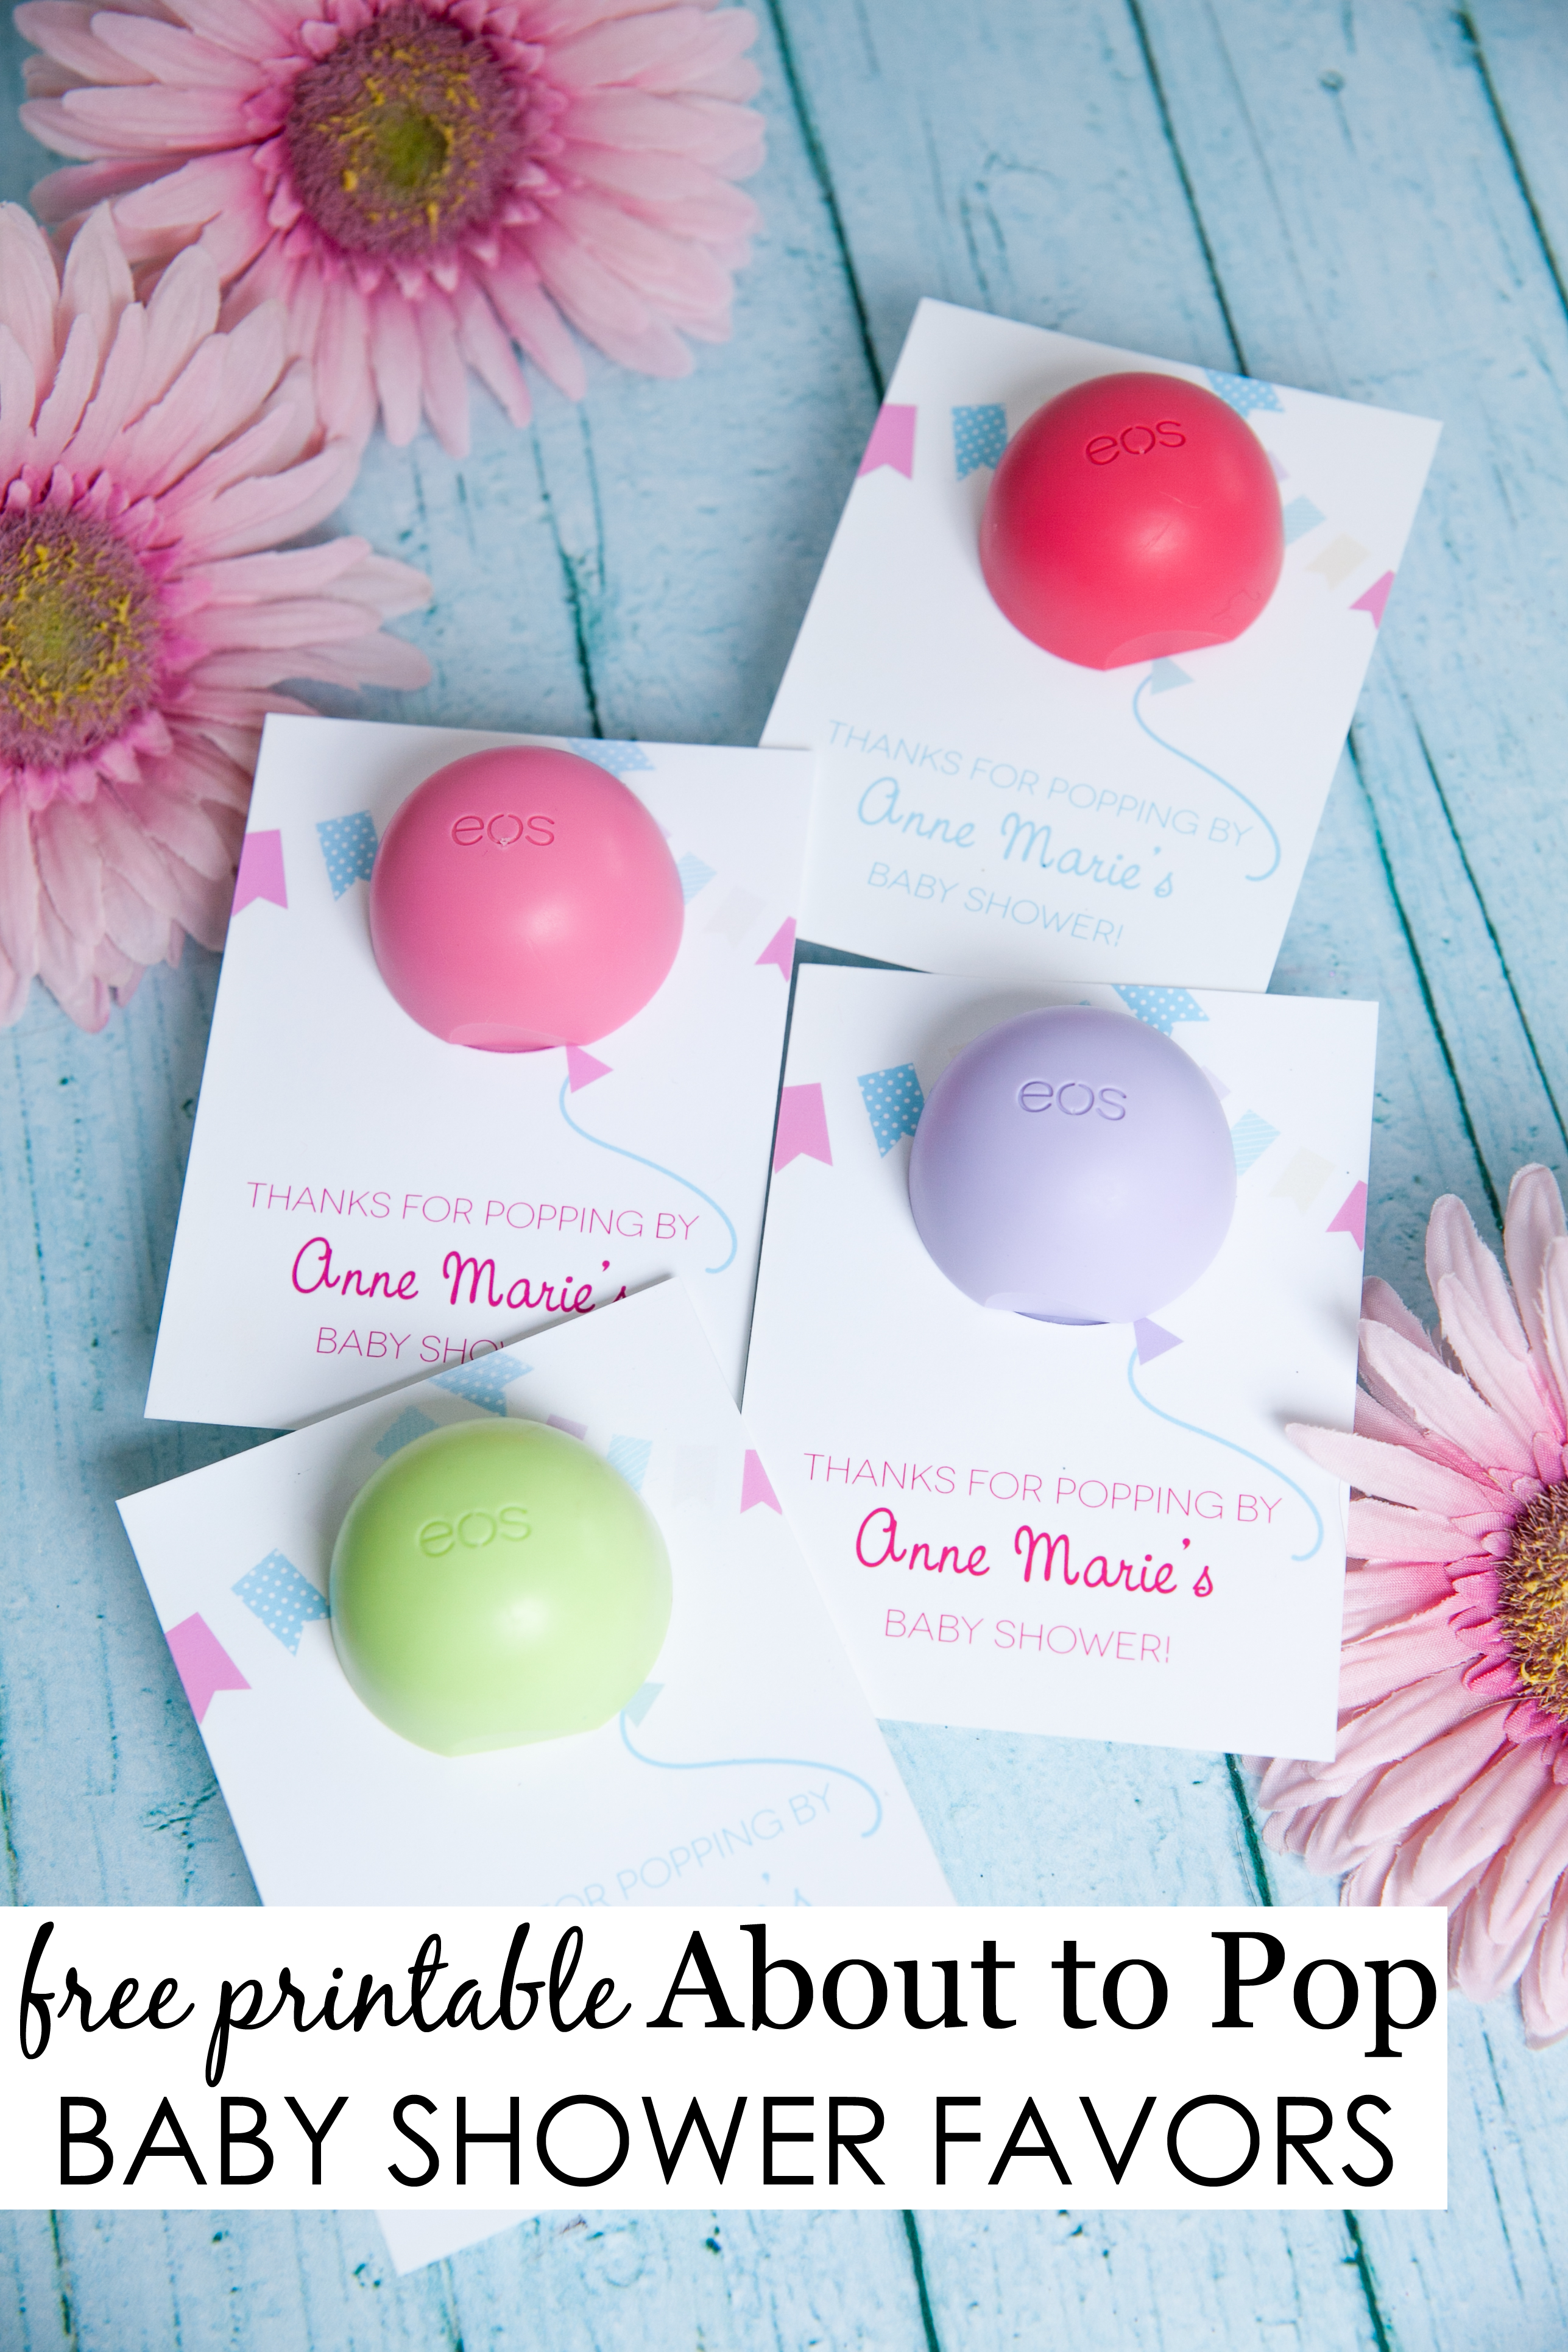 About To Pop Baby Shower Favor | Party Favors | Baby Shower - Ready To Pop Free Printable